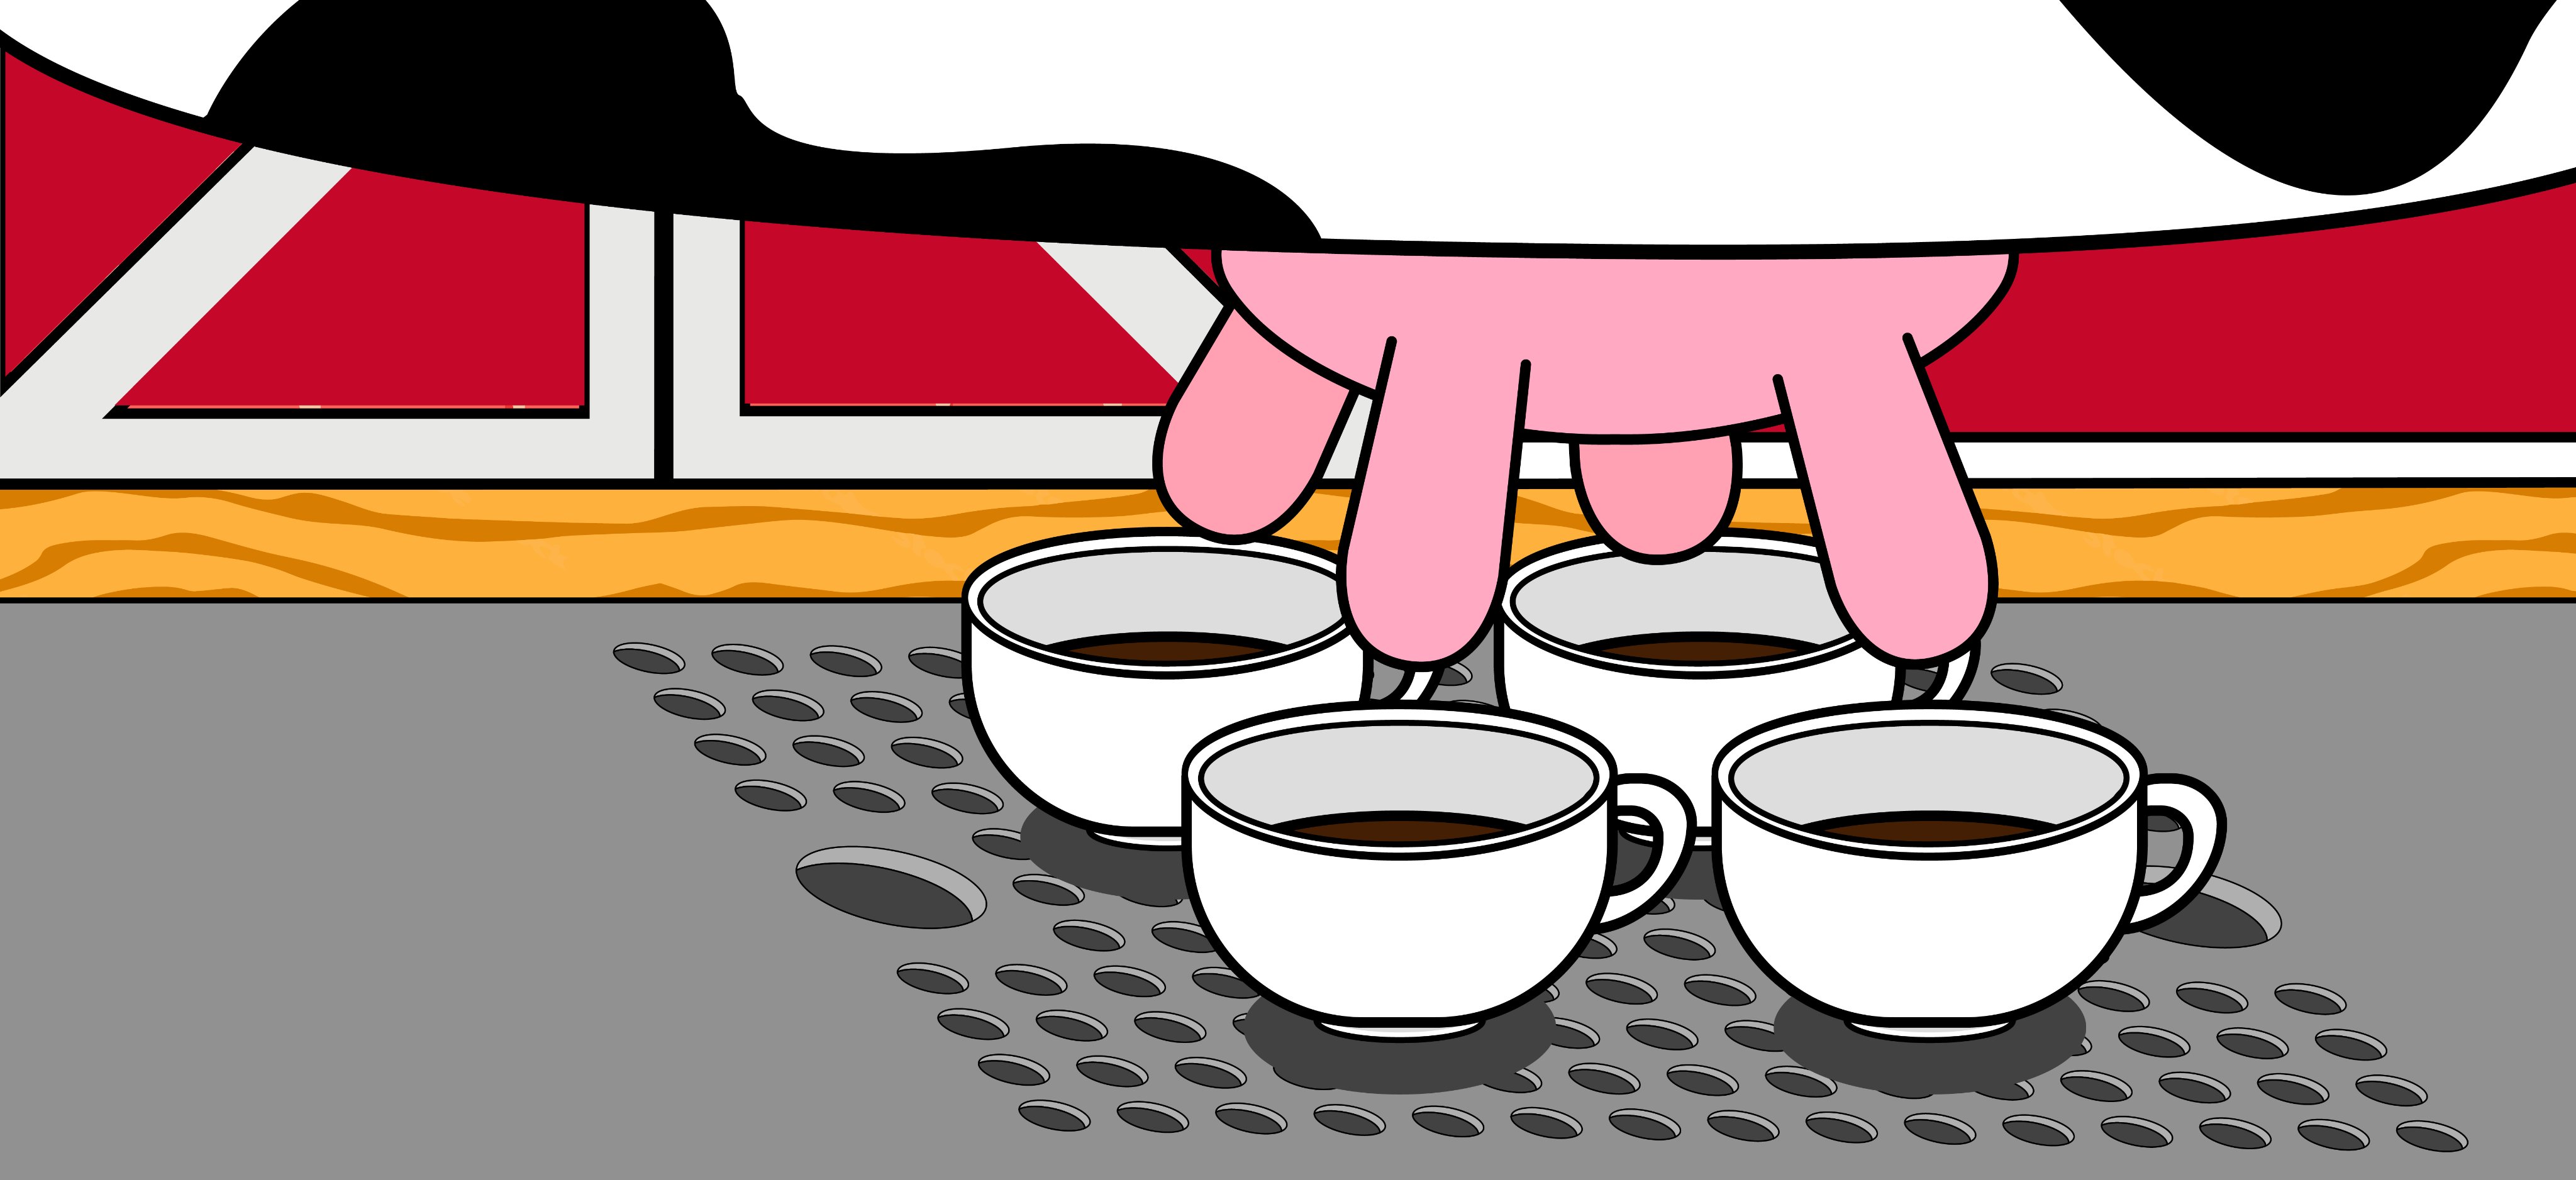 Illustration of a cow udder above a bunch of empty coffee cups